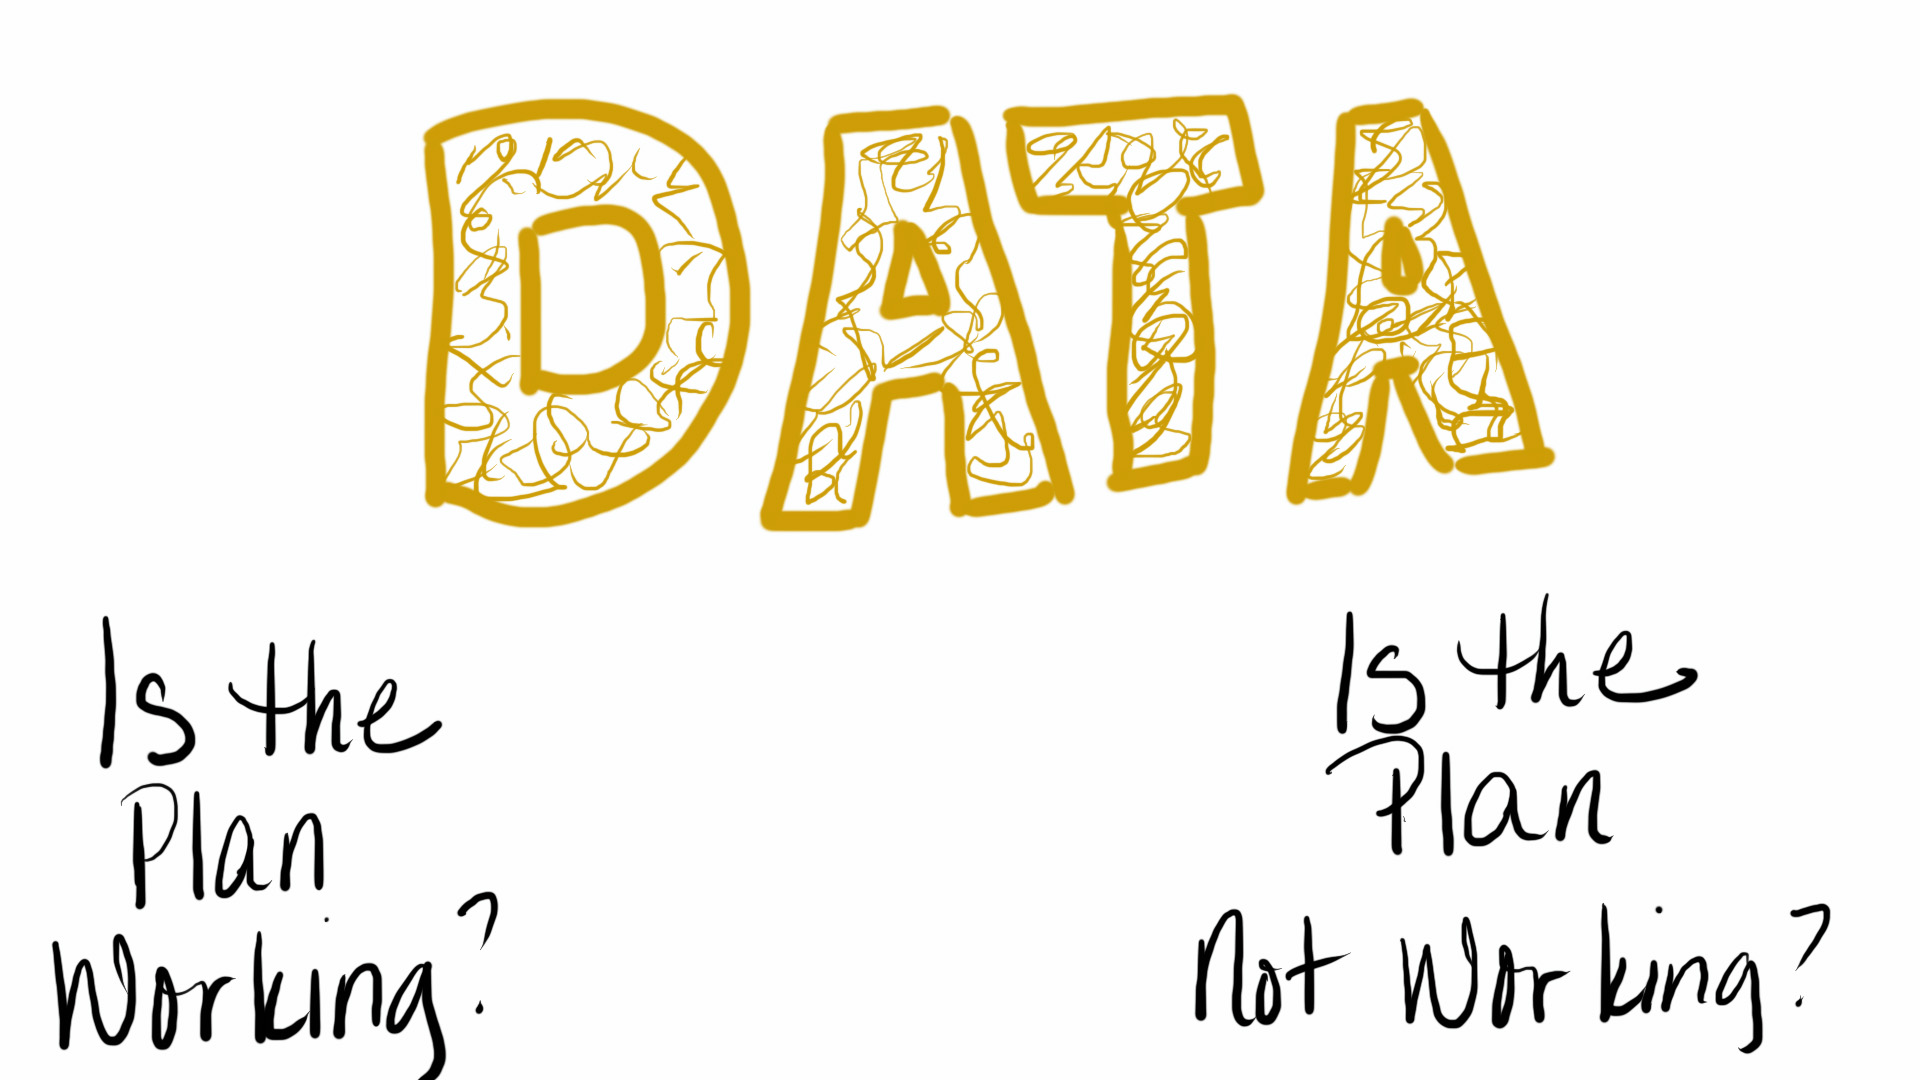 what works or not is just data